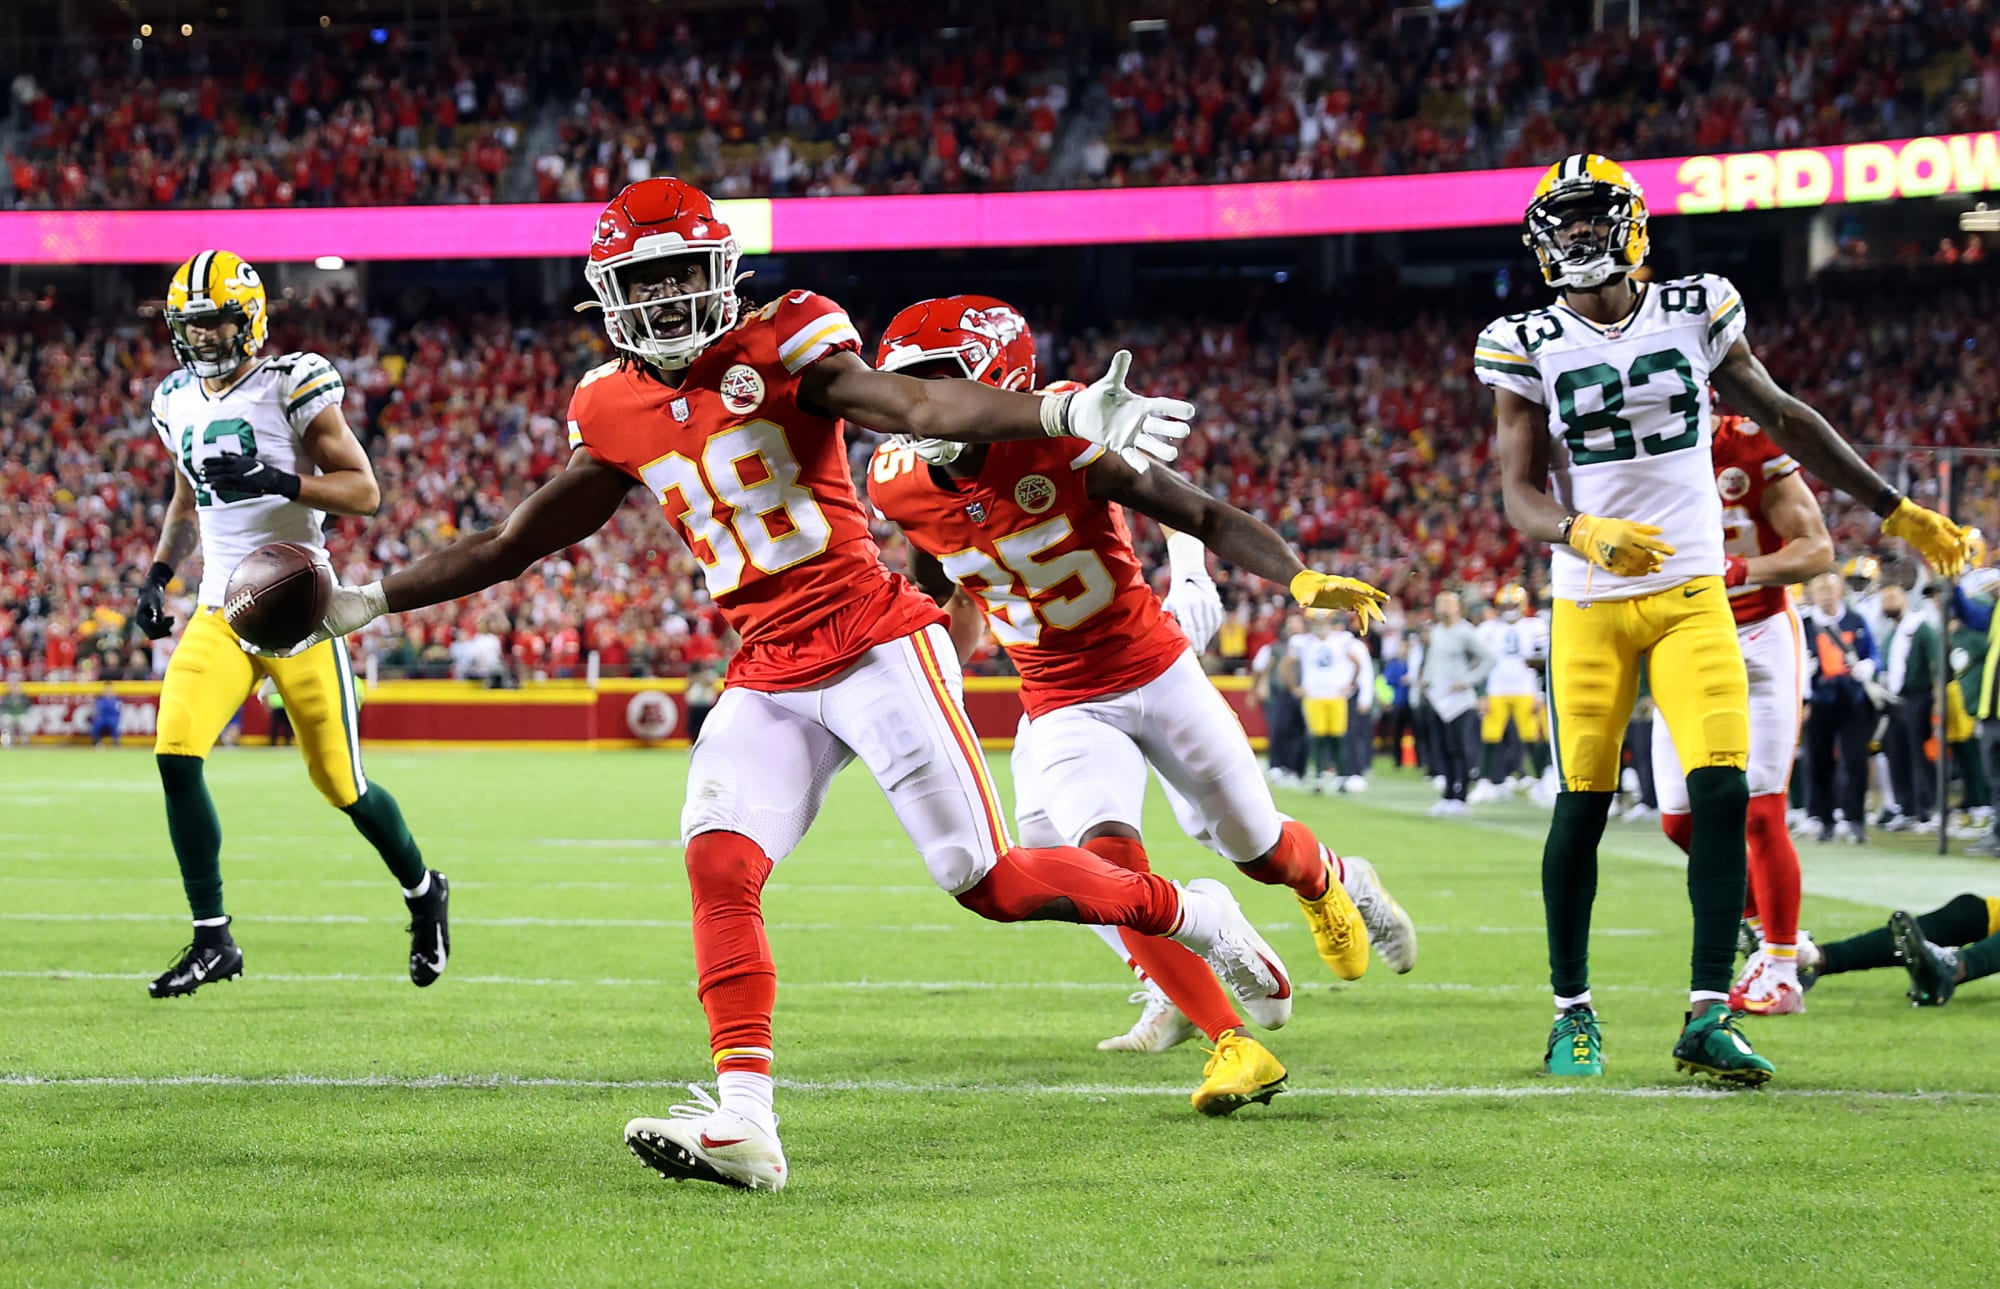 Kansas City Chiefs: A Win Does Not Have To Look Pretty